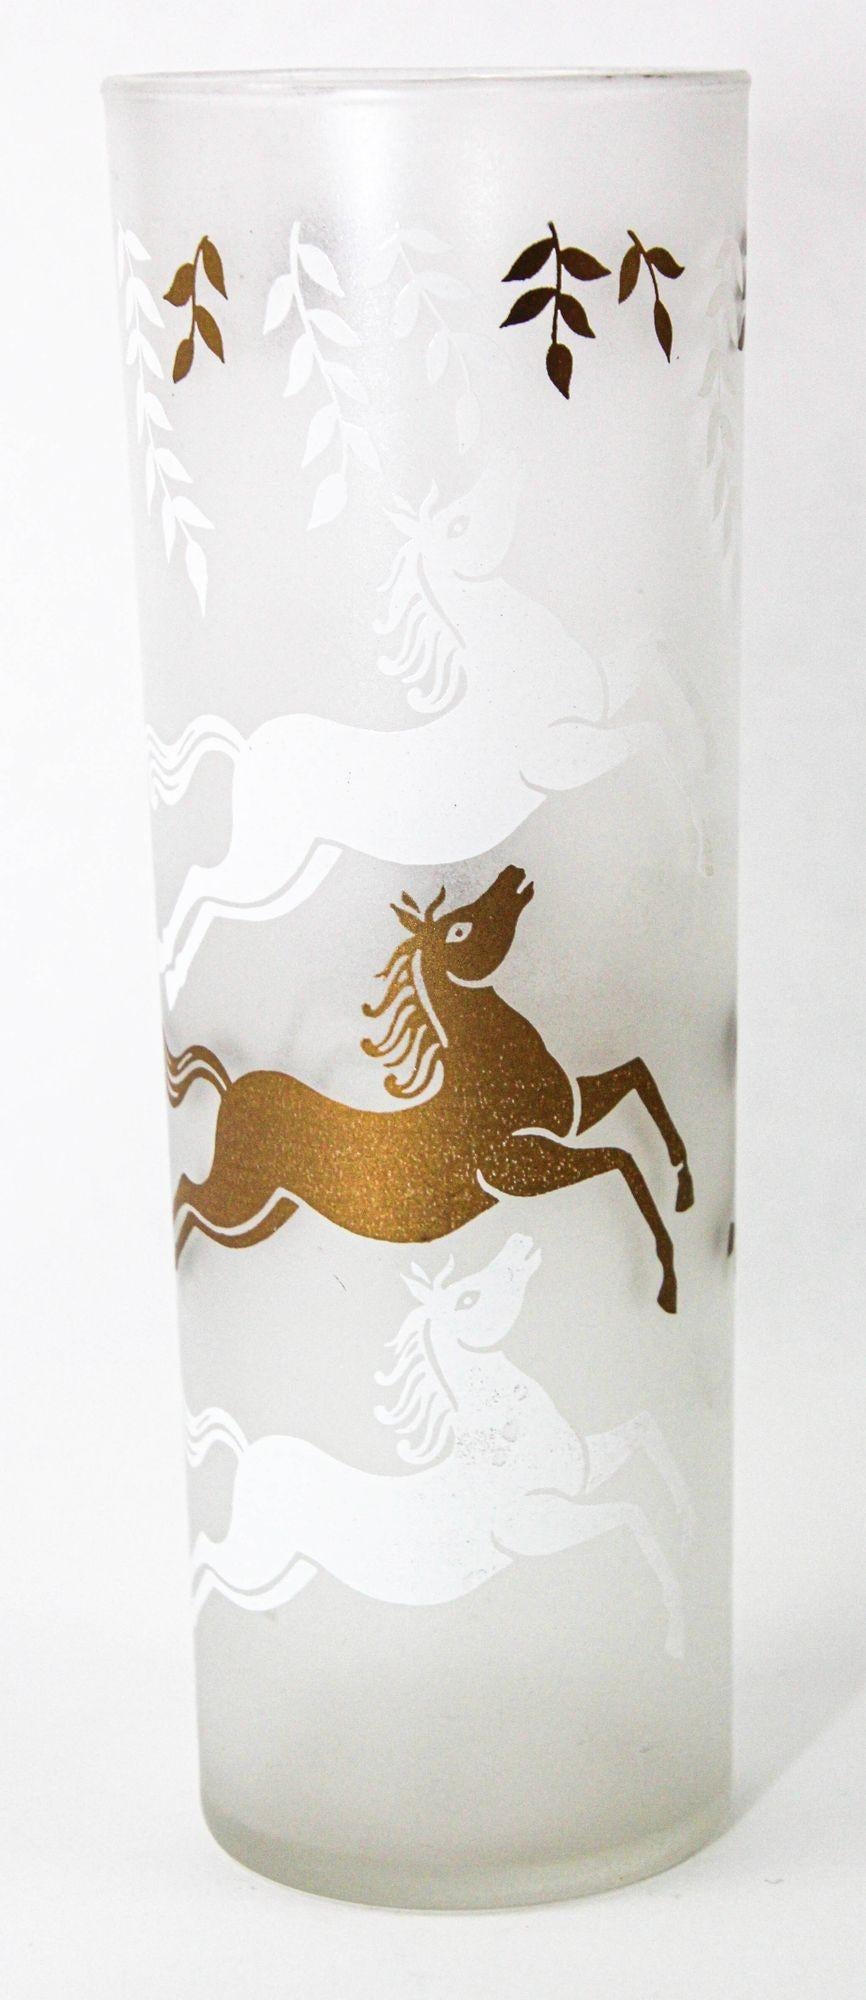 Equestrian Frosted and Gold Drink Glasses Cavalcade by Libbey Galloping Horses For Sale 3